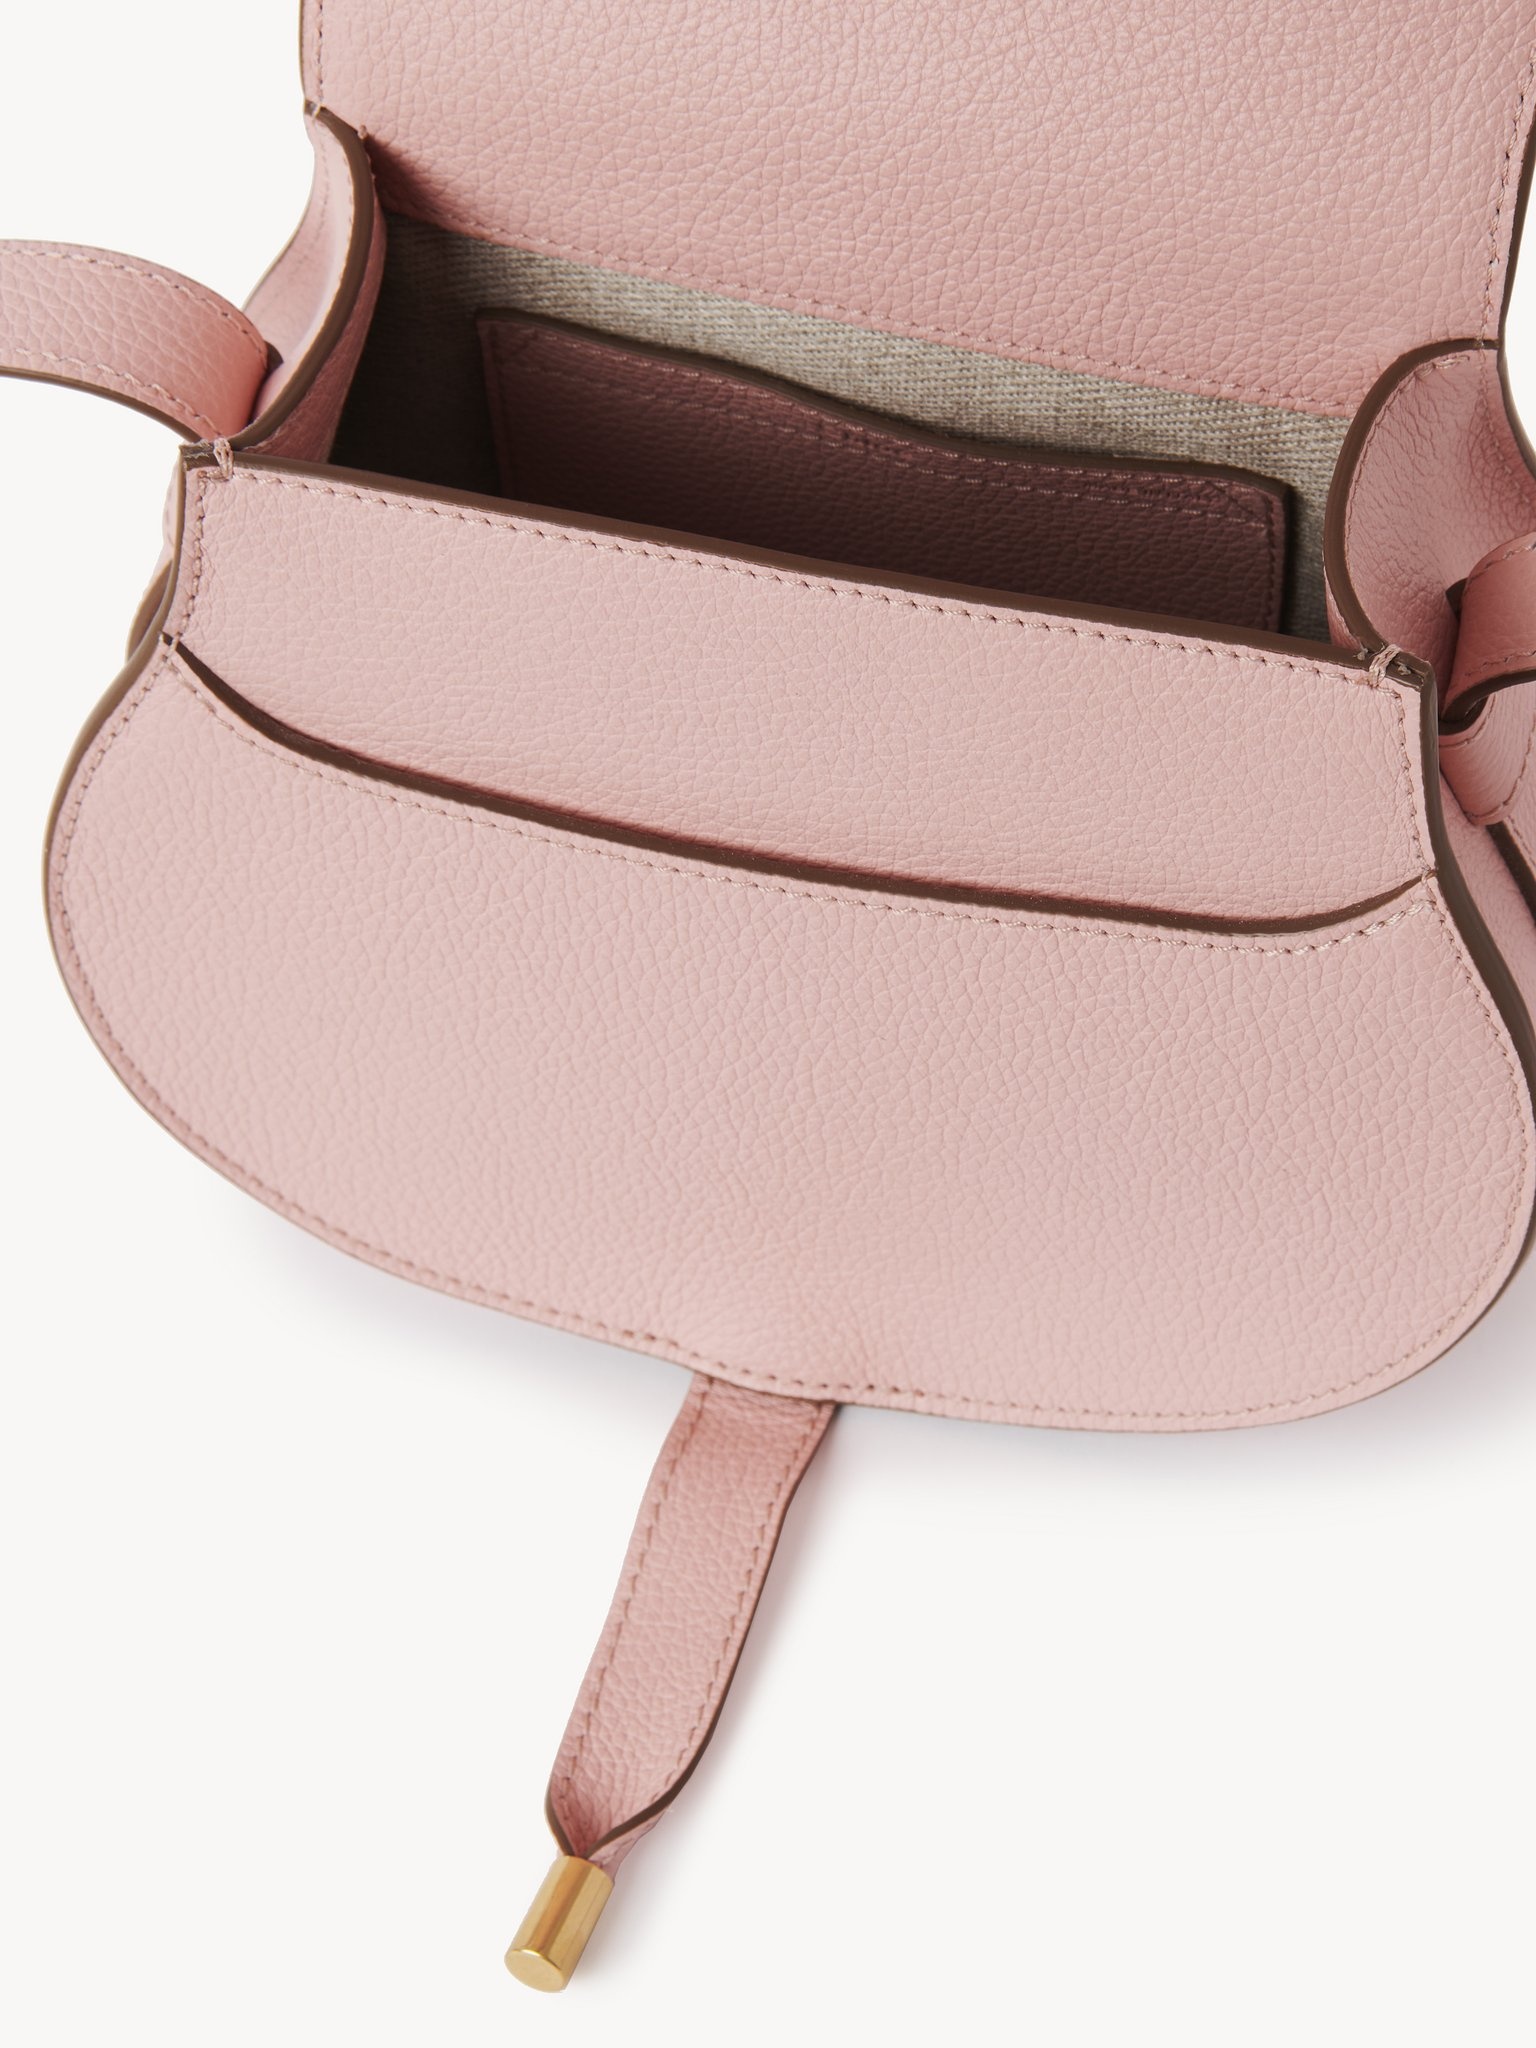  Marcie Small Pink Leather Bag